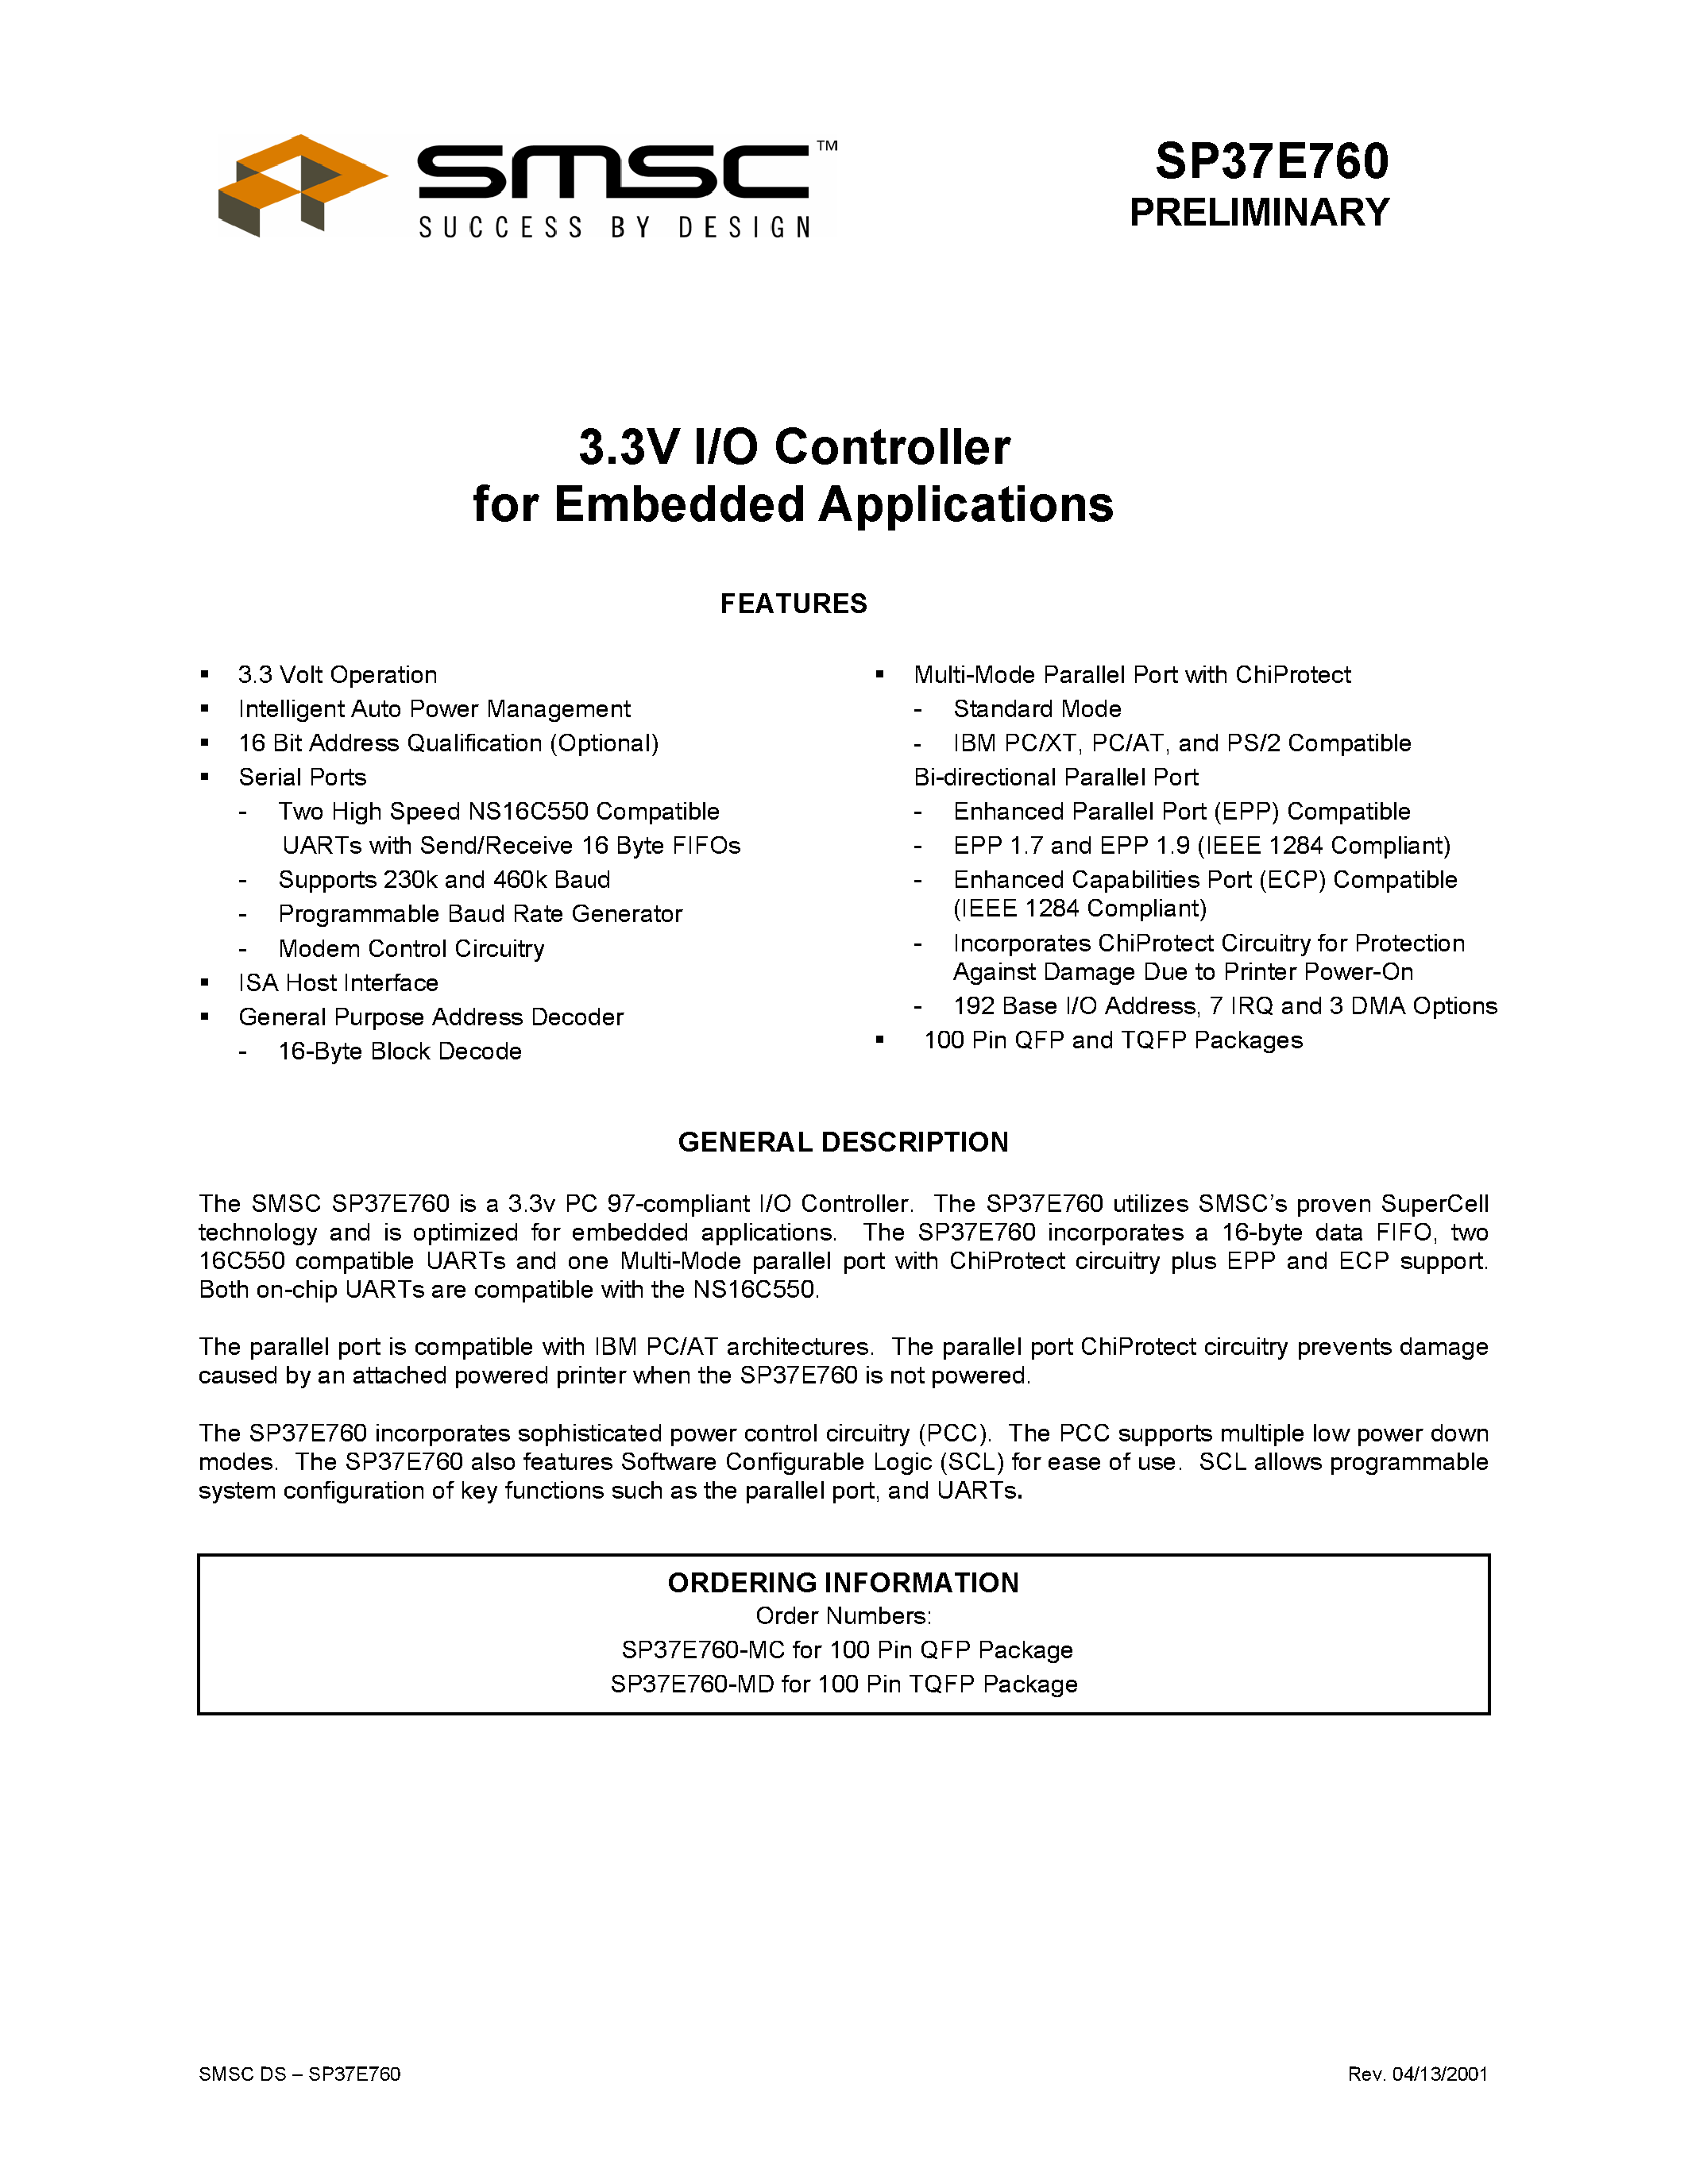 Datasheet SP37E760-MD - 3.3 V I/O CONTROLLER FOR EMBEDDED APPLICATIONS page 1